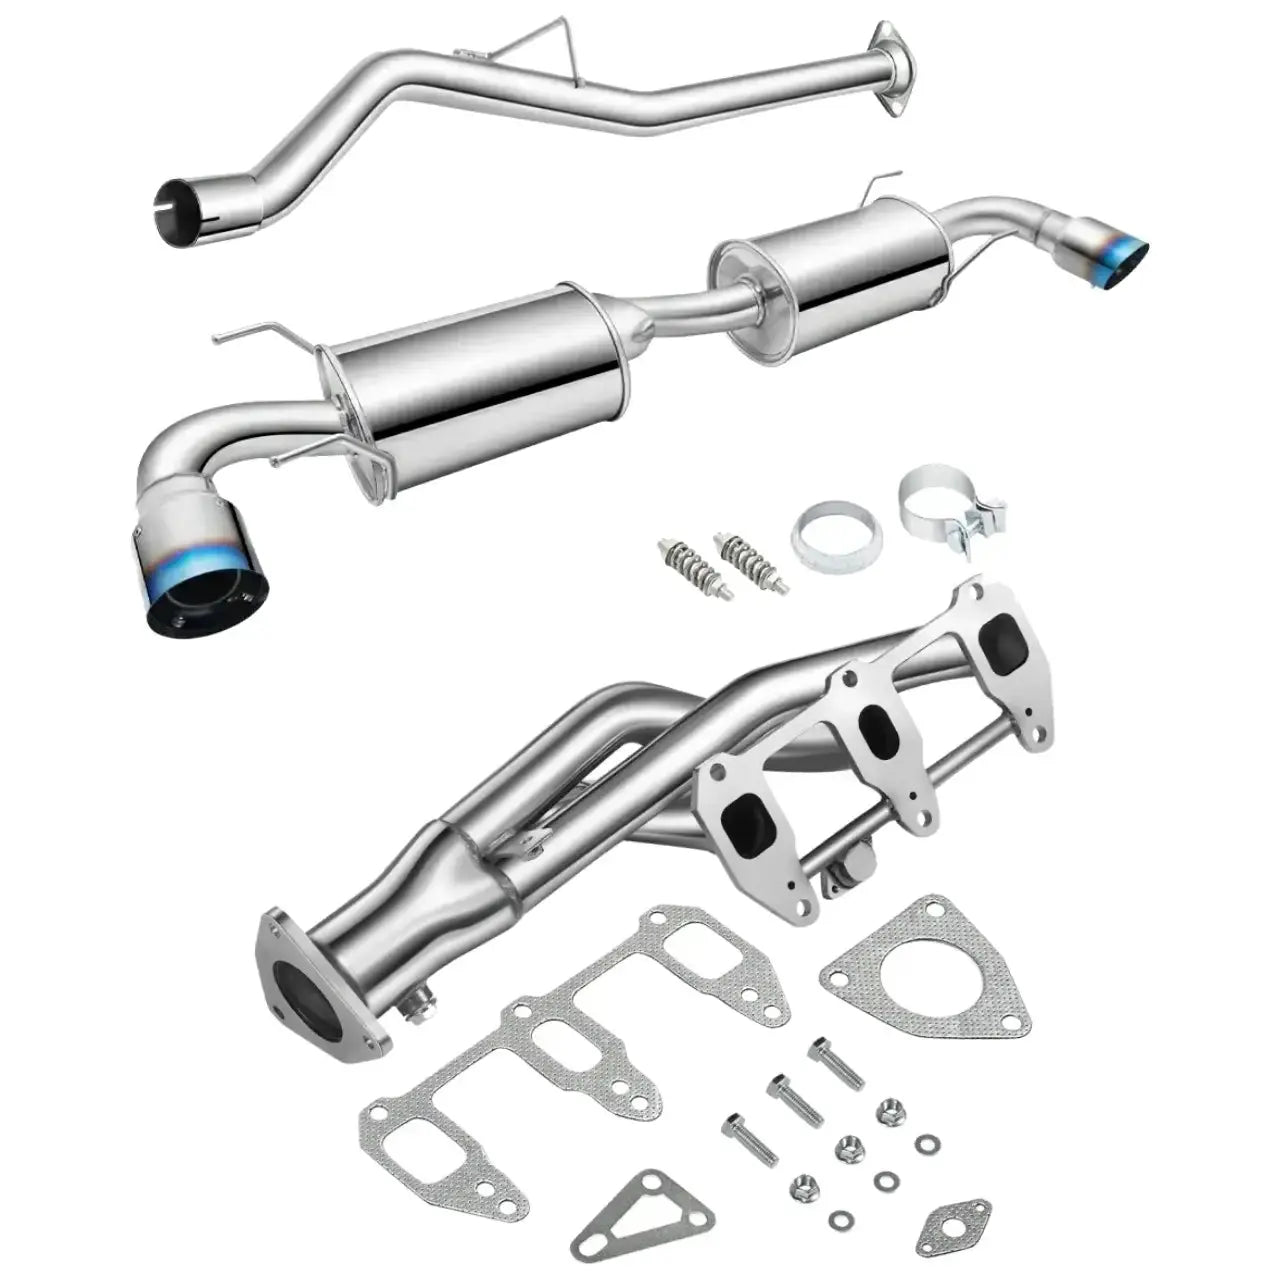 Exhaust Header/Catback Exhaust System w/ Dual Burnt Tip All-In-One Kit for 2004-2008 Mazda RX-8 1.3L Flashark